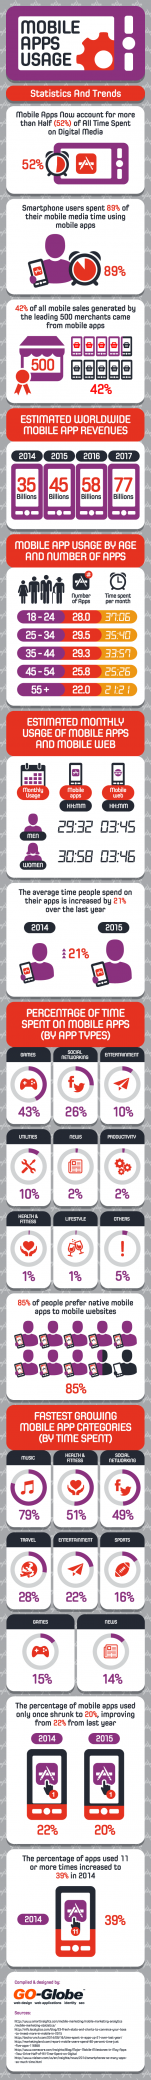 cellular Apps utilization – facts and developments [Infographic]